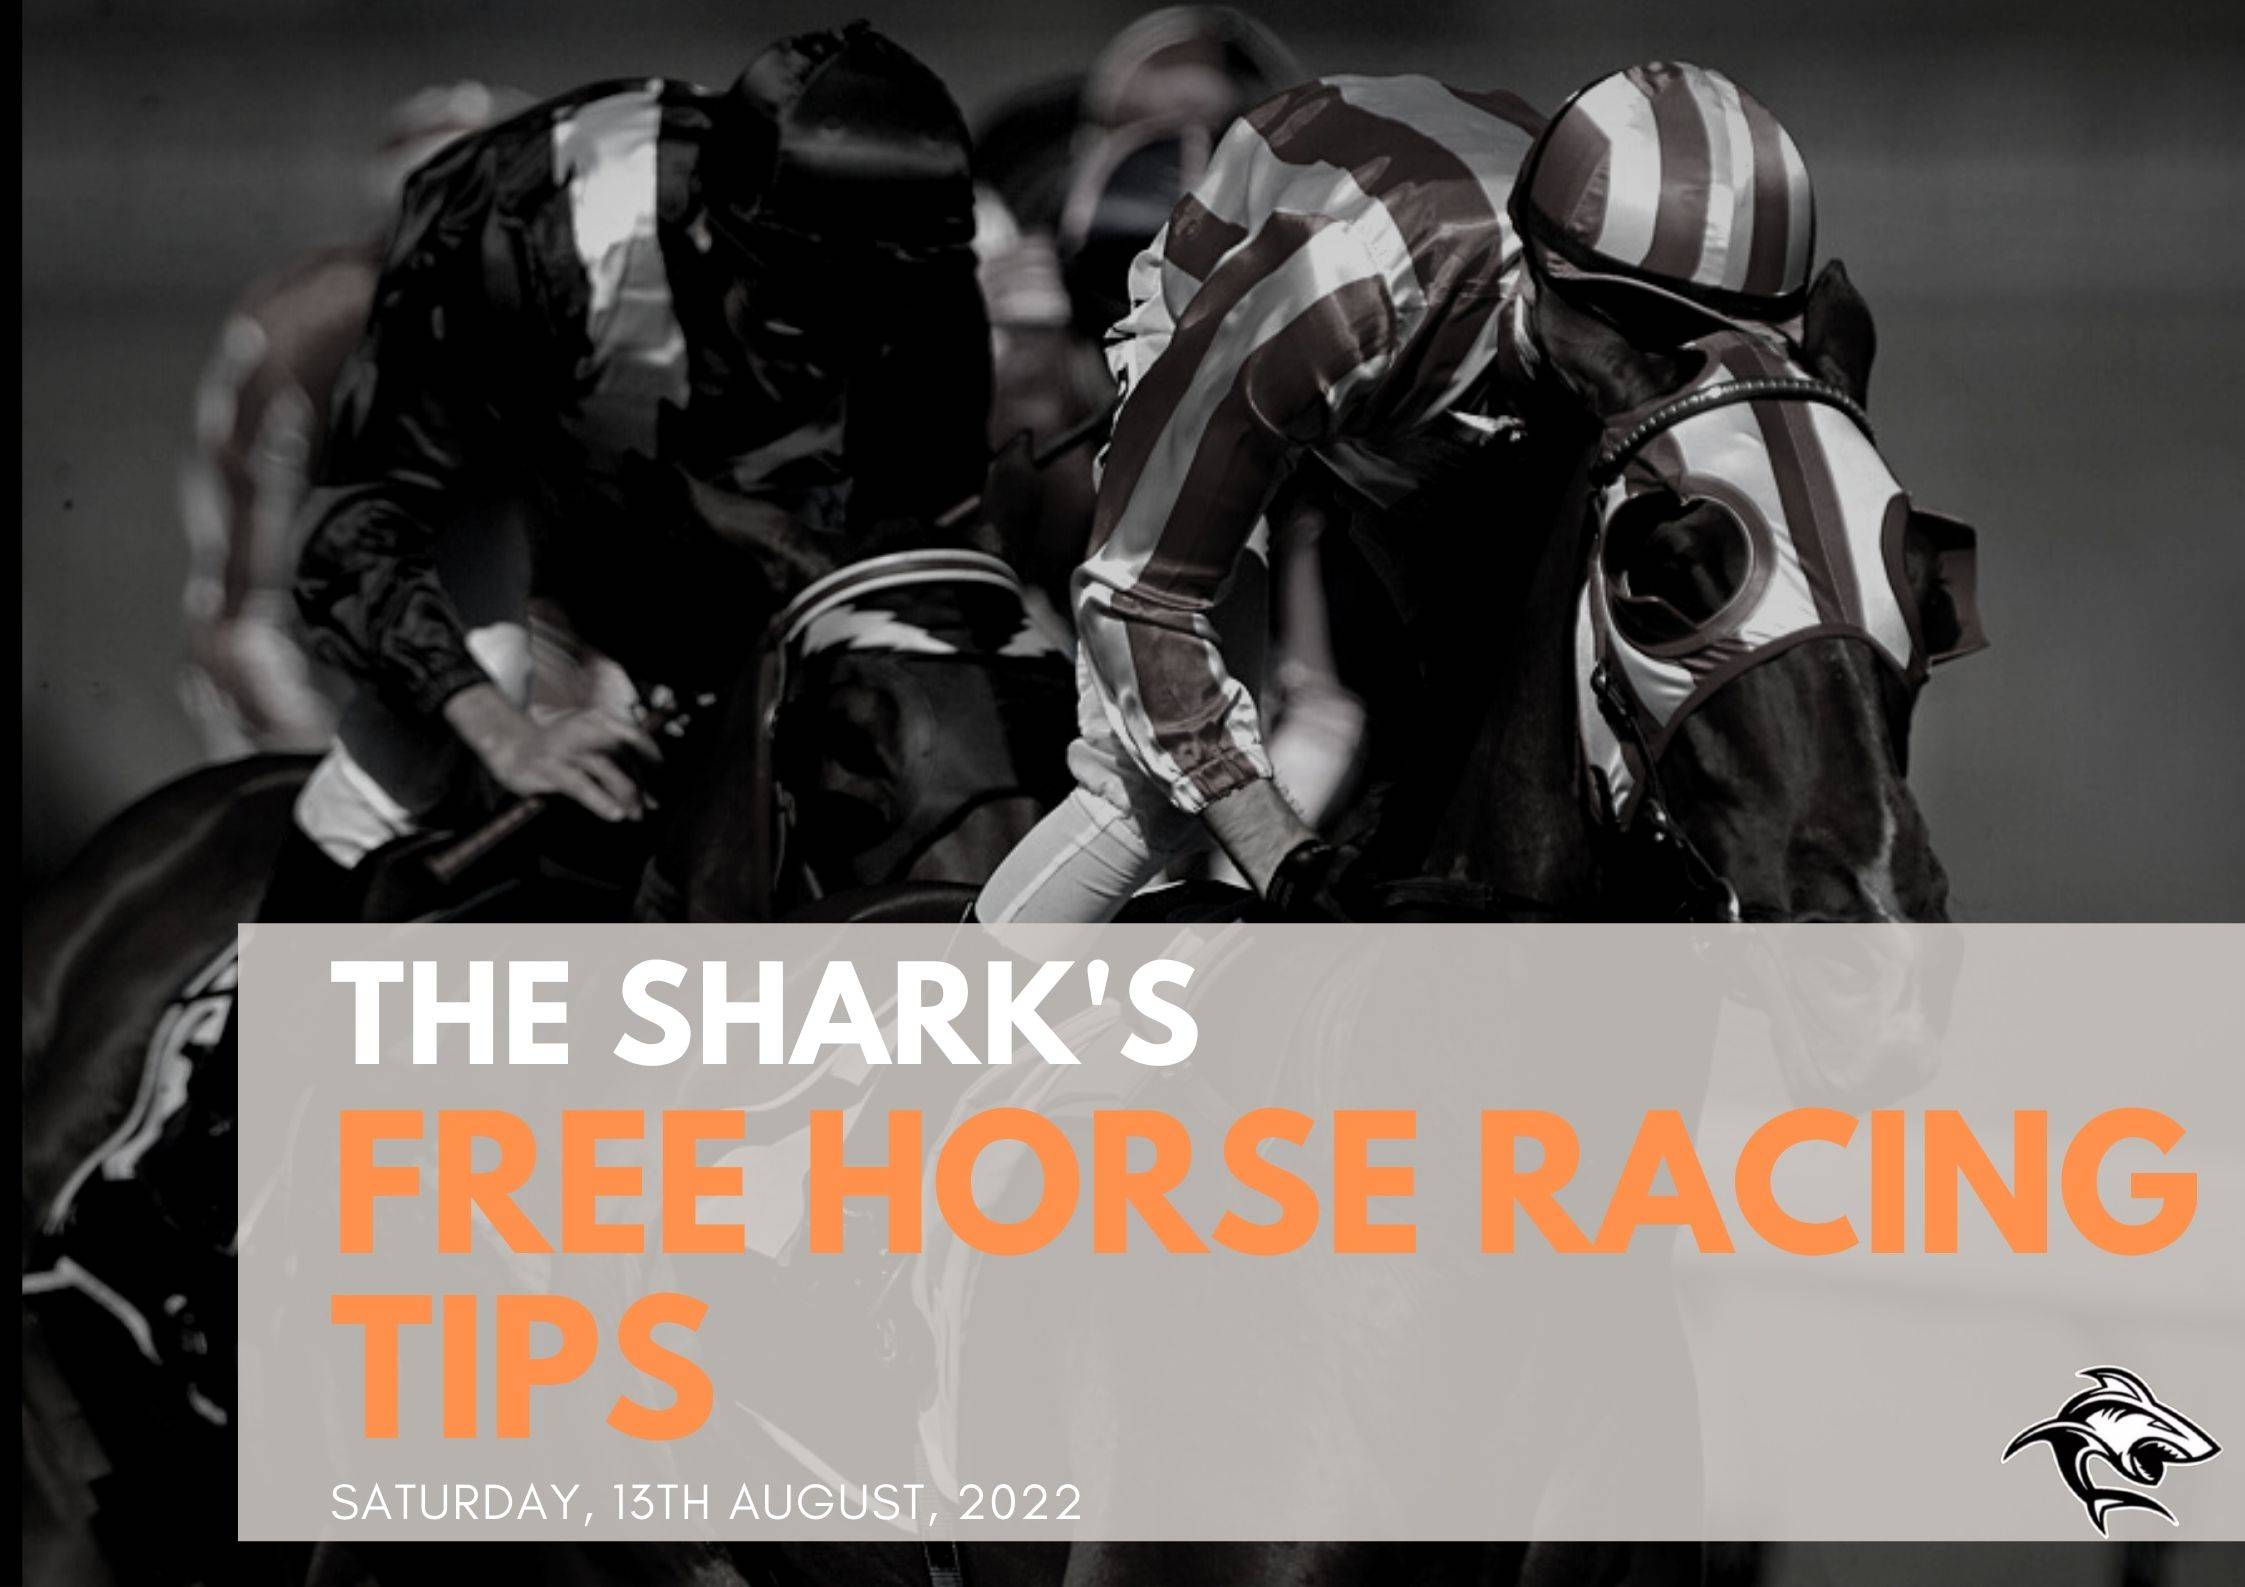 Free Horse Racing Tips - 13th Aug